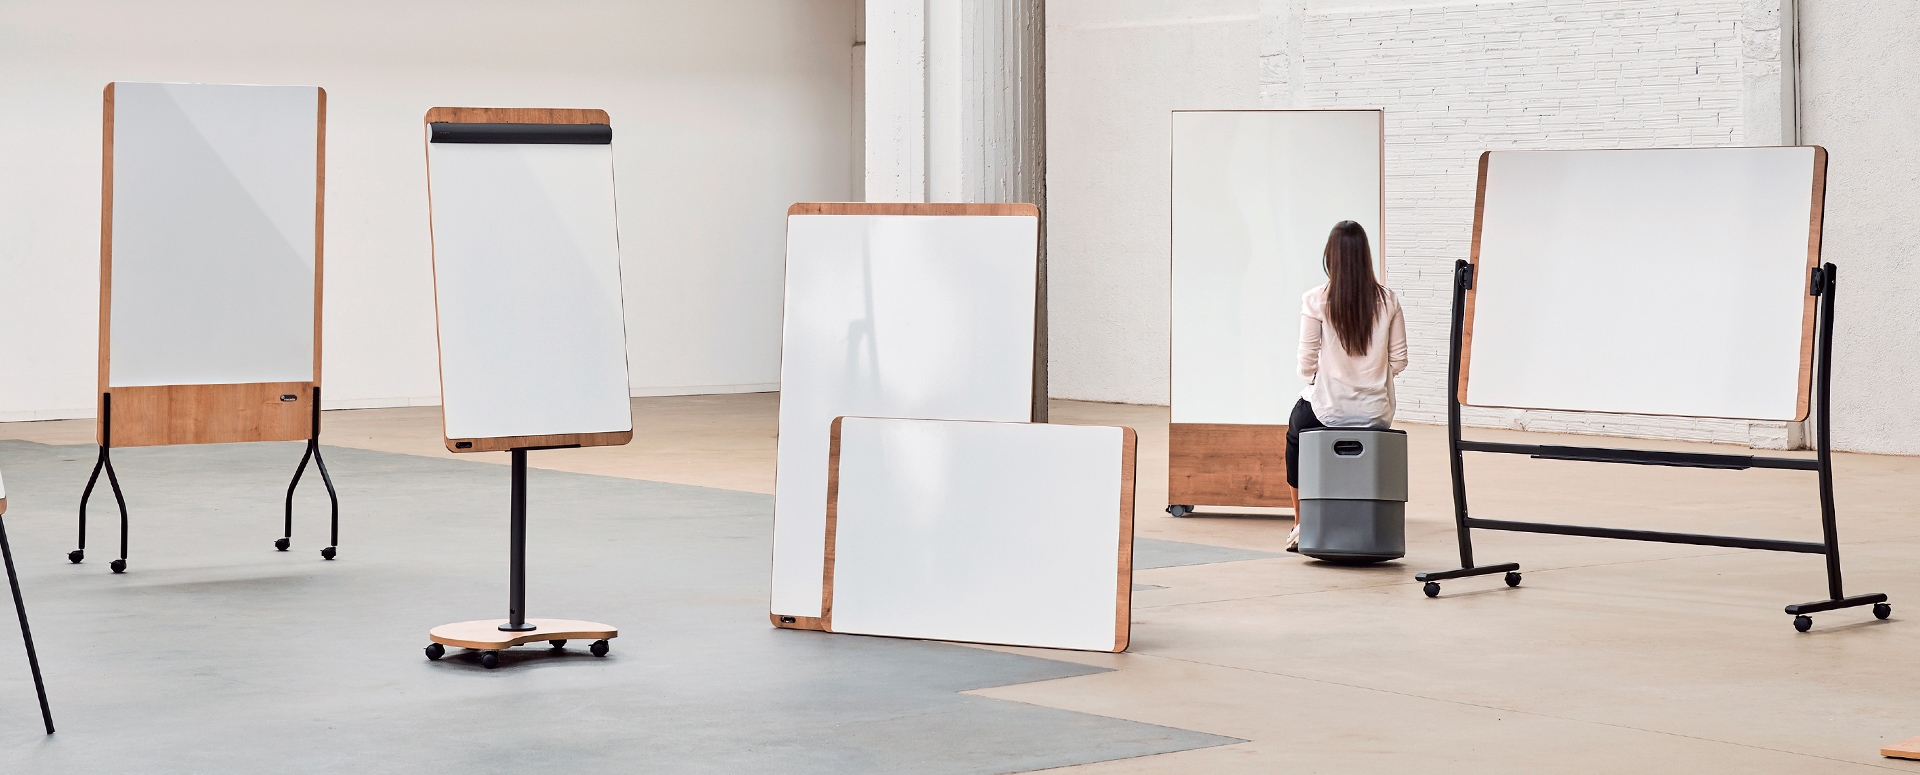 NATURAL whiteboards, the perfection of the nature.